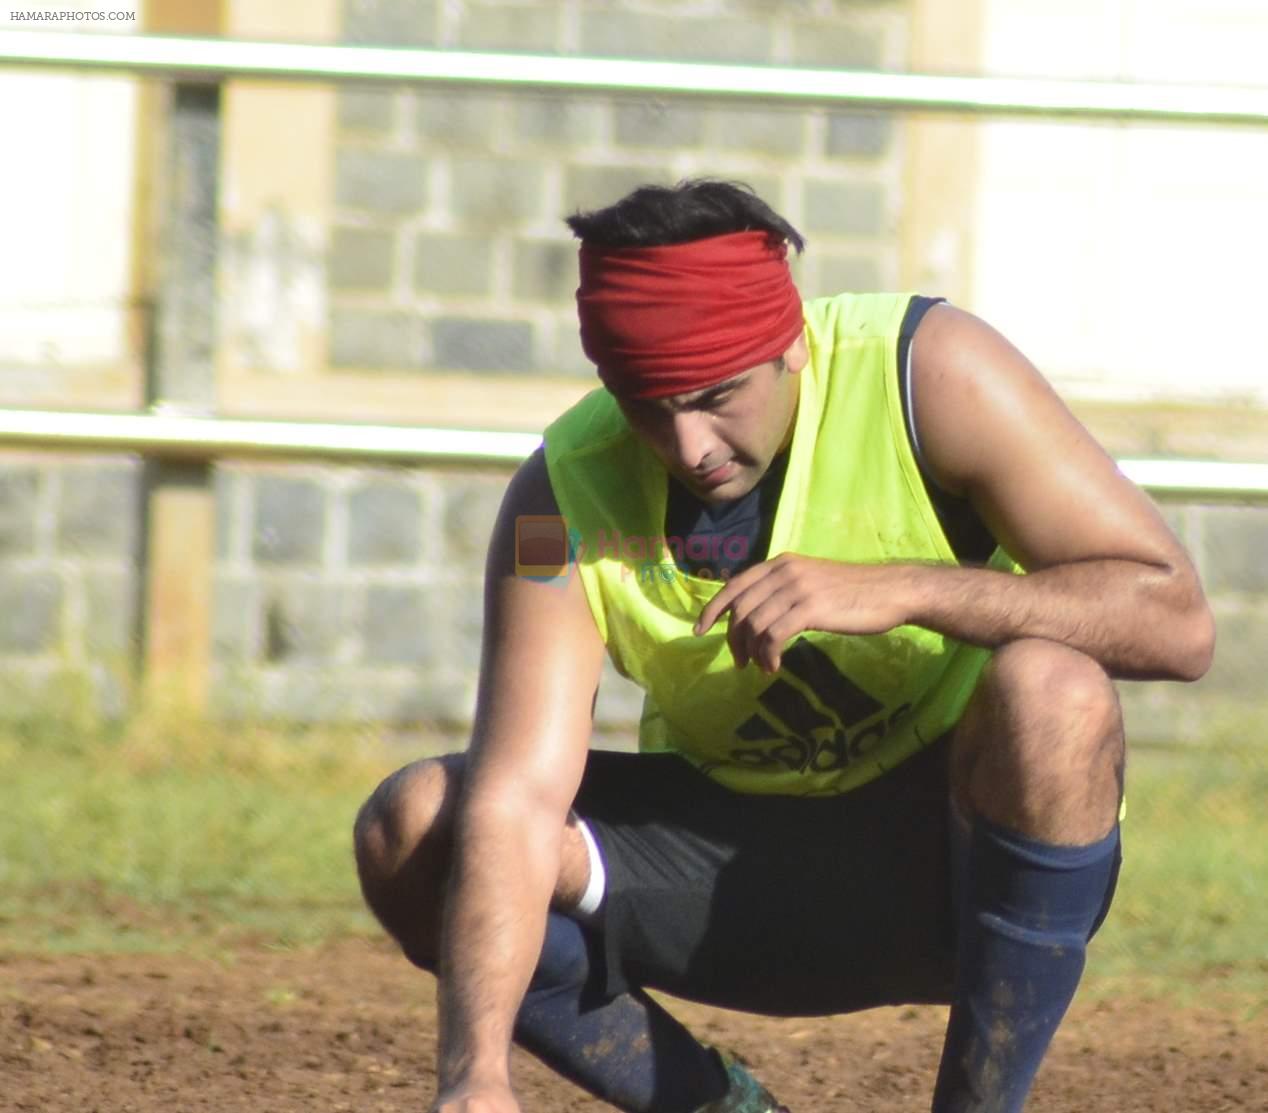 Ranbir Kapoor is back with soccer practice sessions on 14th June 2015